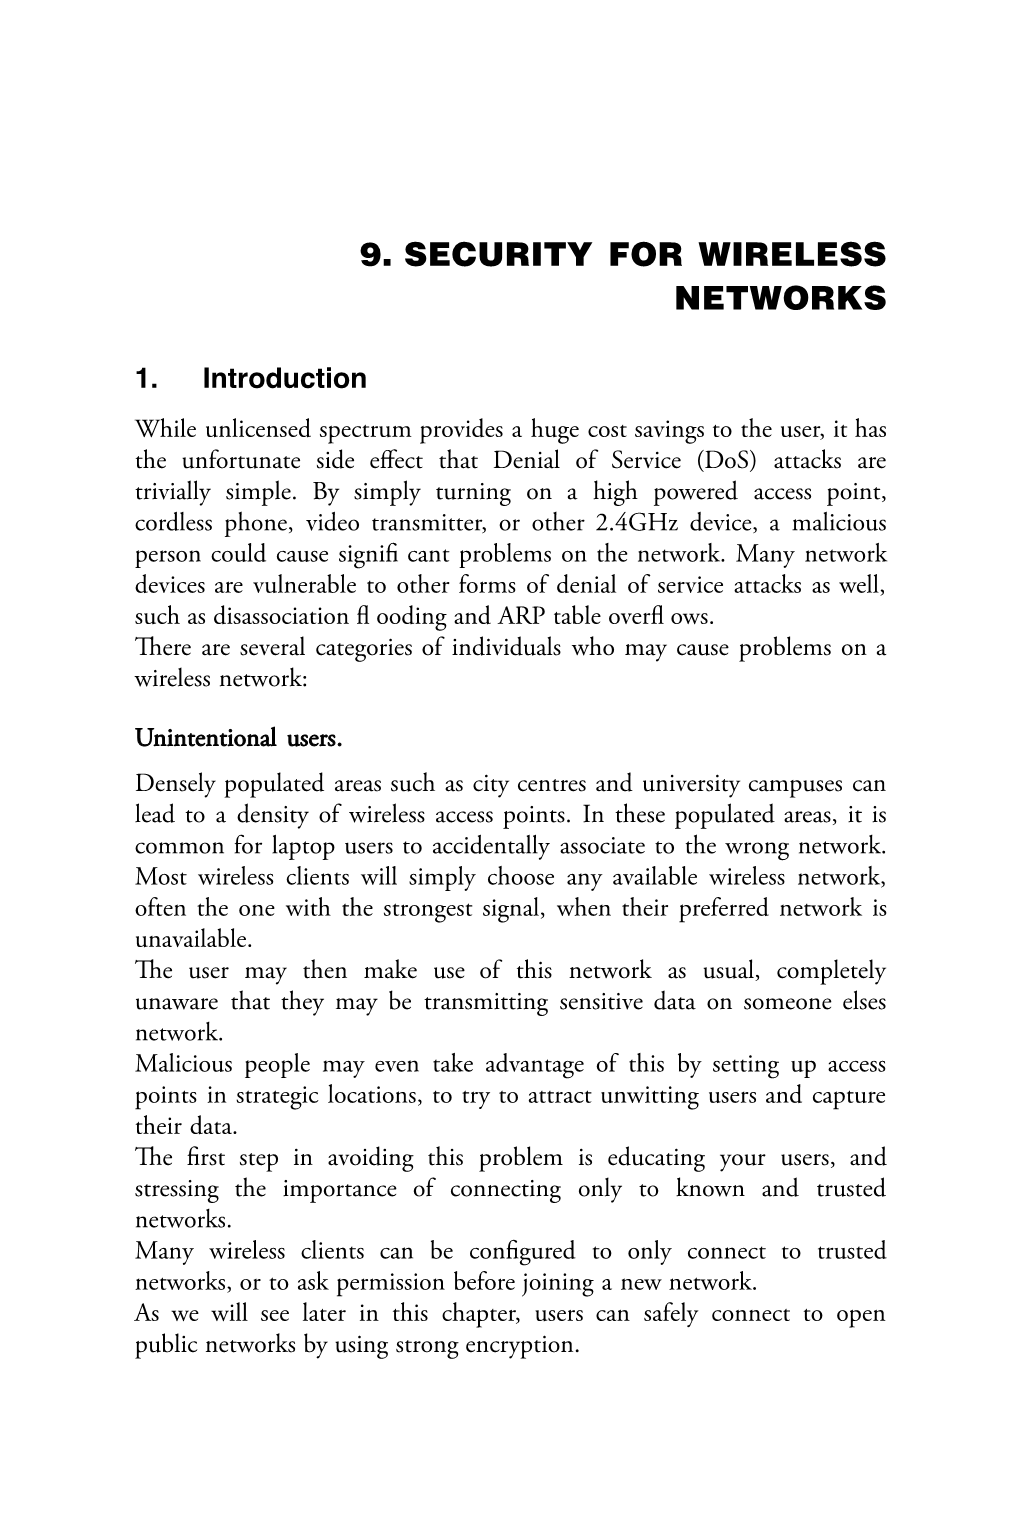 Security for Wireless Networks